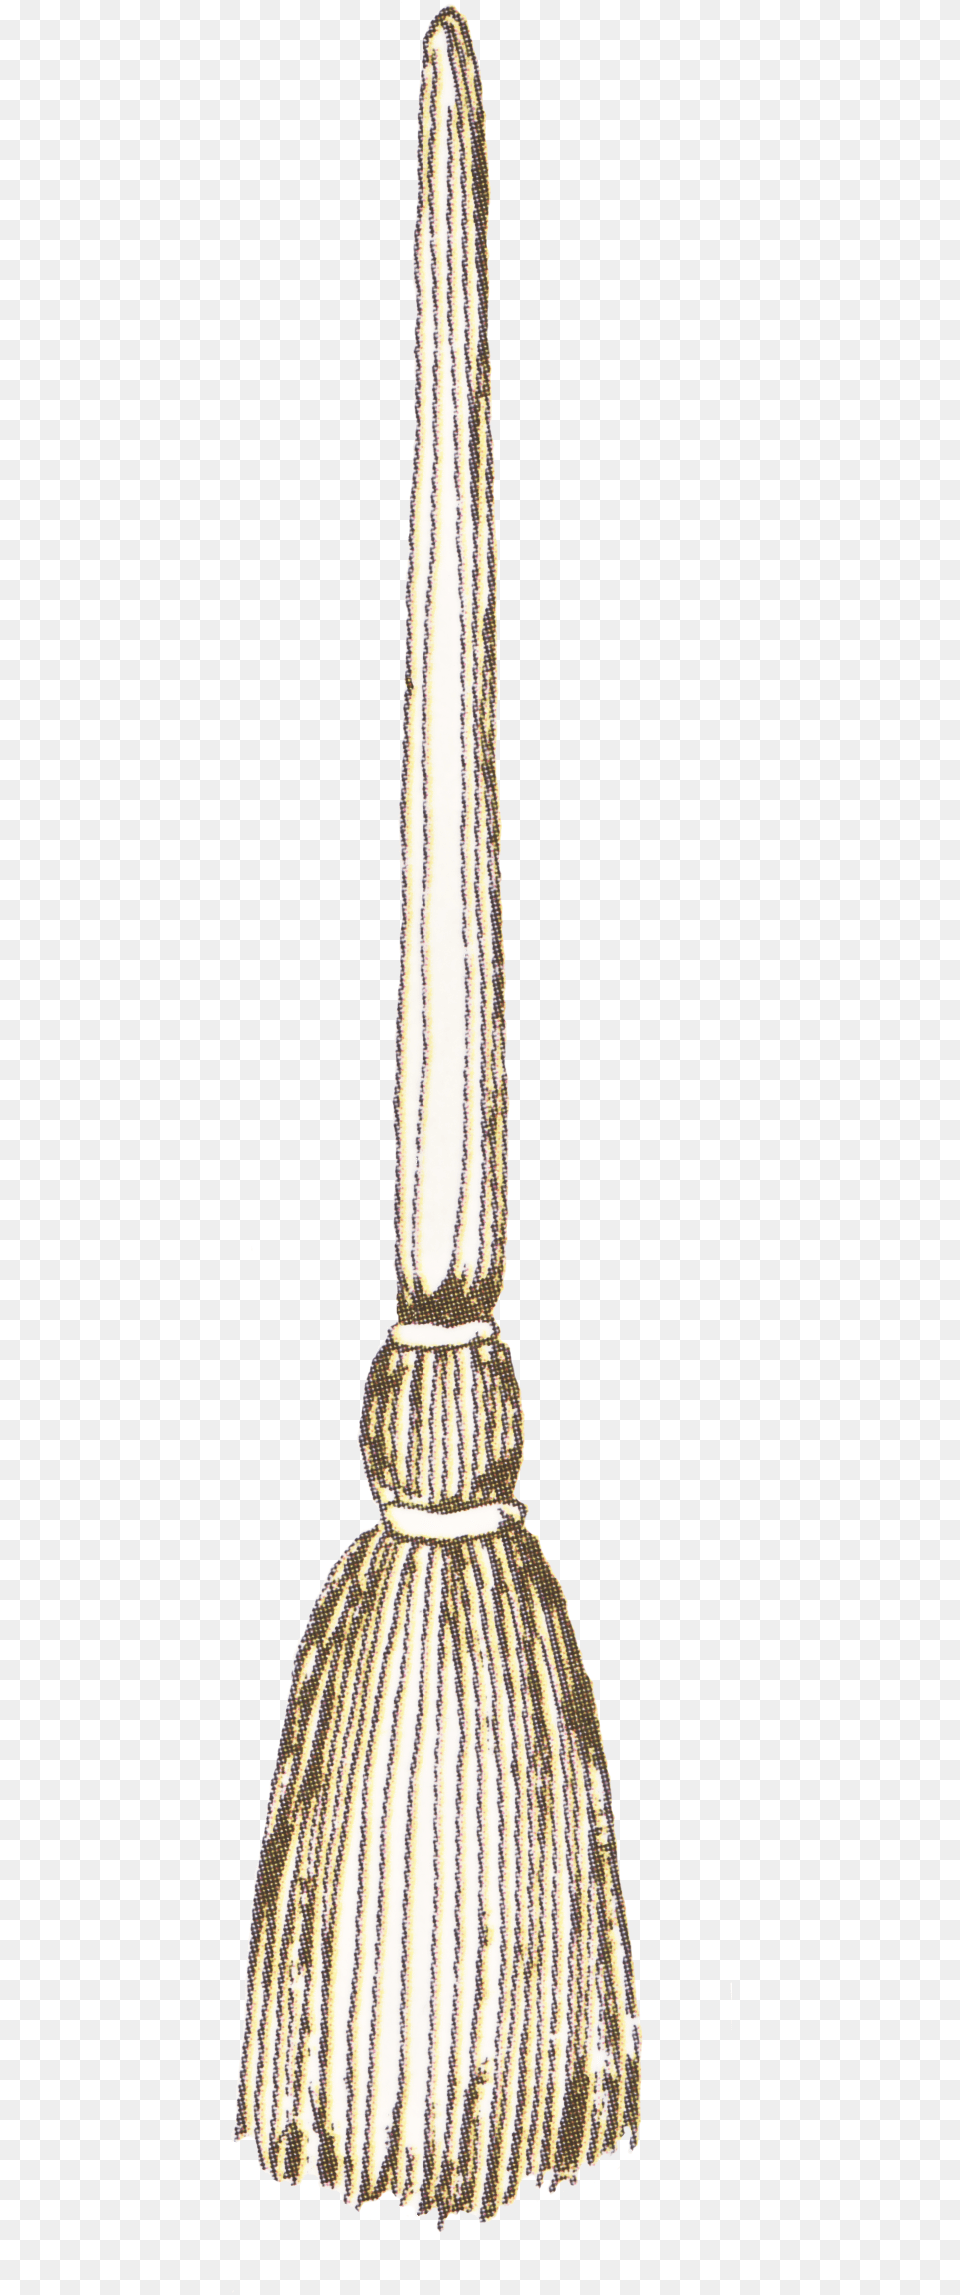 Colonial Broom Graphic Lucky Colonial Broom, Lamp, Sword, Weapon Png Image